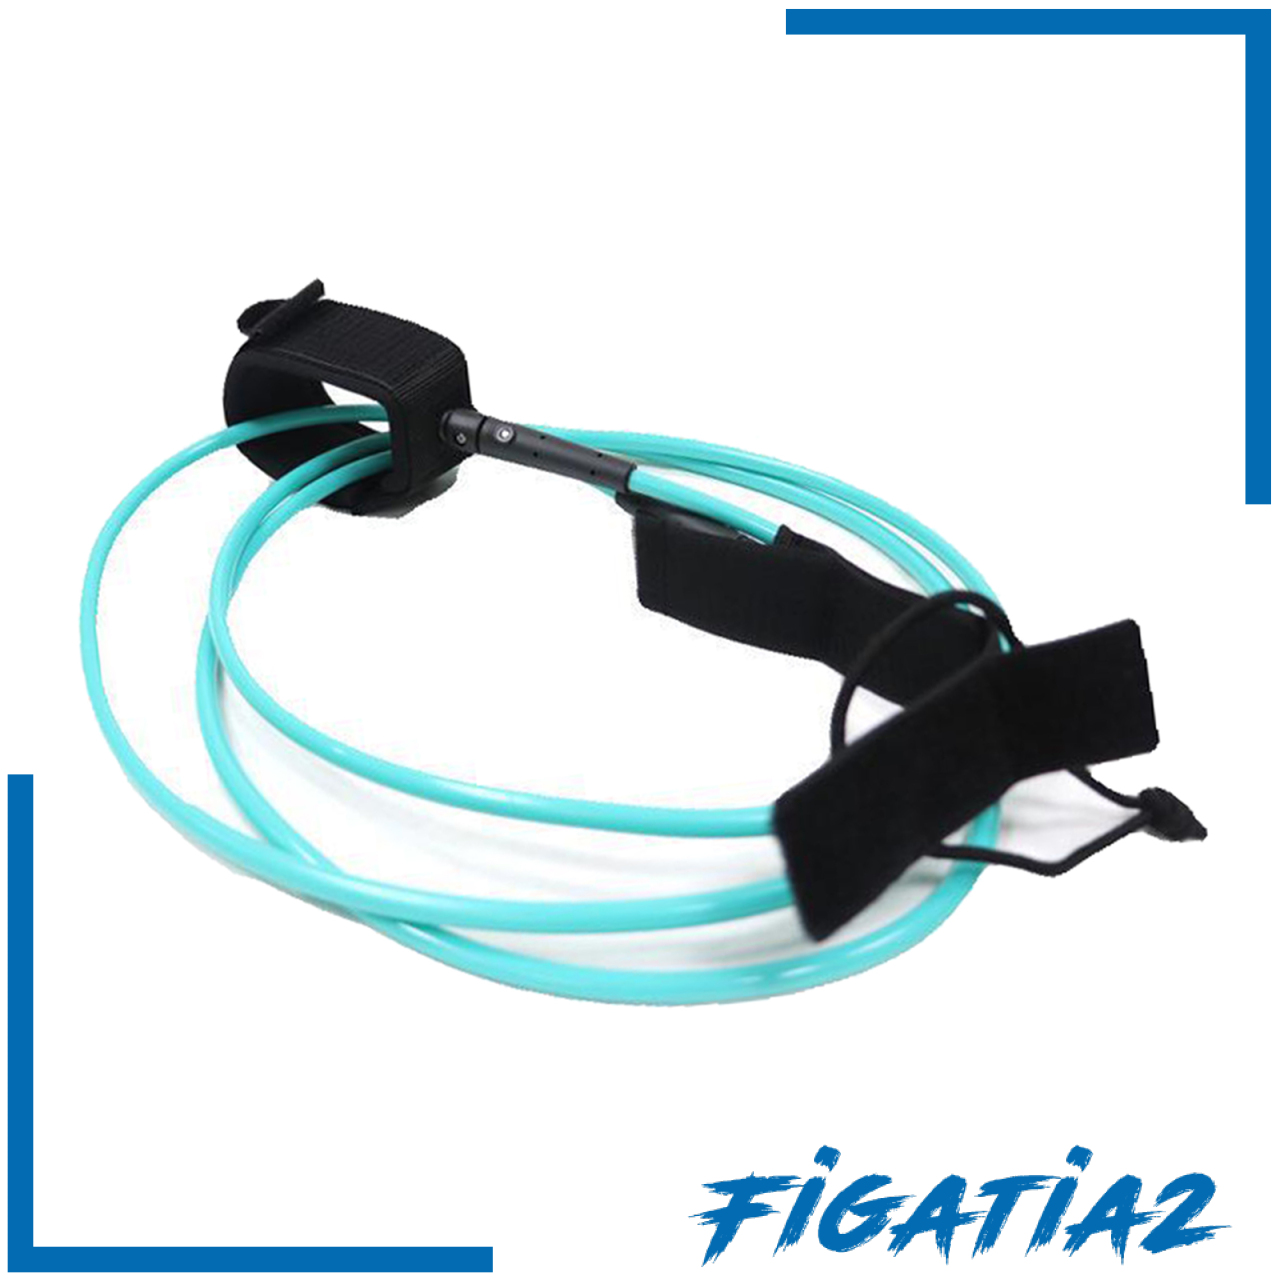 [FIGATIA2]10 Feet Surfing Ankle Leash Stand Up Board Leg Rope Leg Wrists Tether Cord